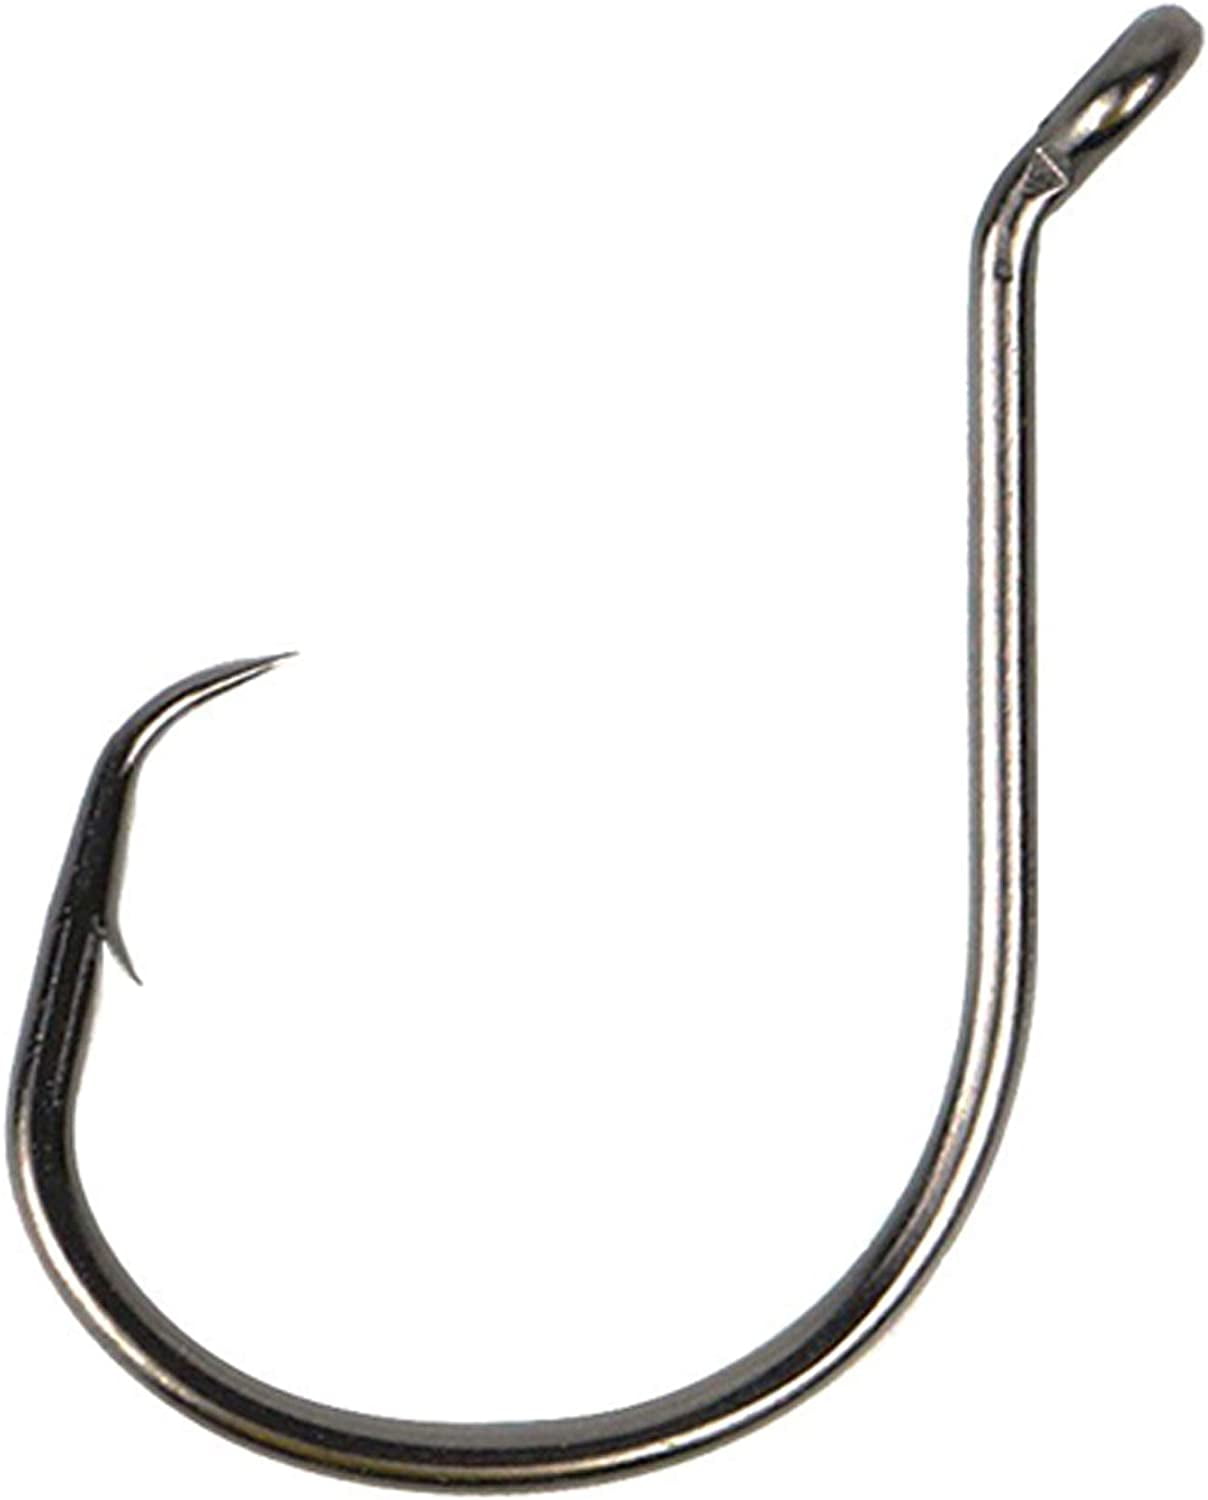 CHSS Snelled Circle Hook, 12-Inch Monofilament, Size 3/0 Hooks, Pack of 6